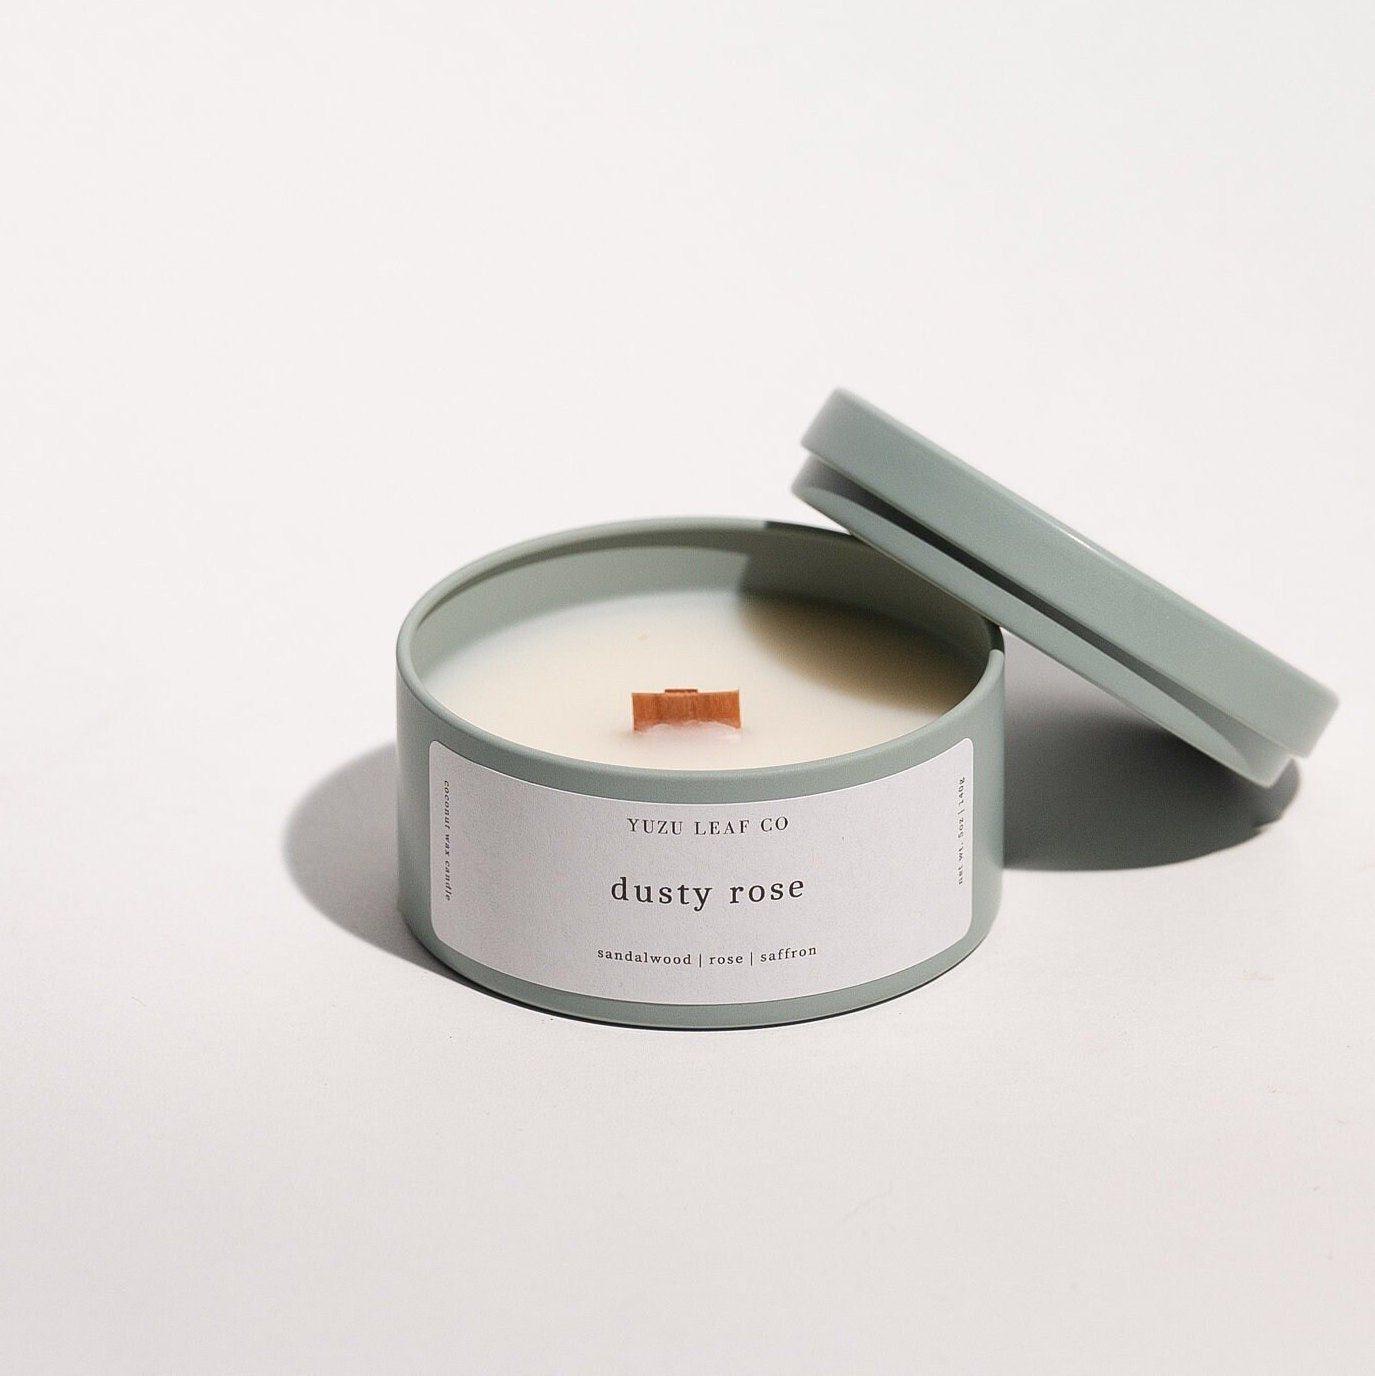 There is a candle tin that is about the size of a circular ice cream sandwich or small burger. The lid is off and leaning against the side to display the wooden wick in the middle. The candle is named "dusty rose" with notes of sandalwood, rose, and saffron.